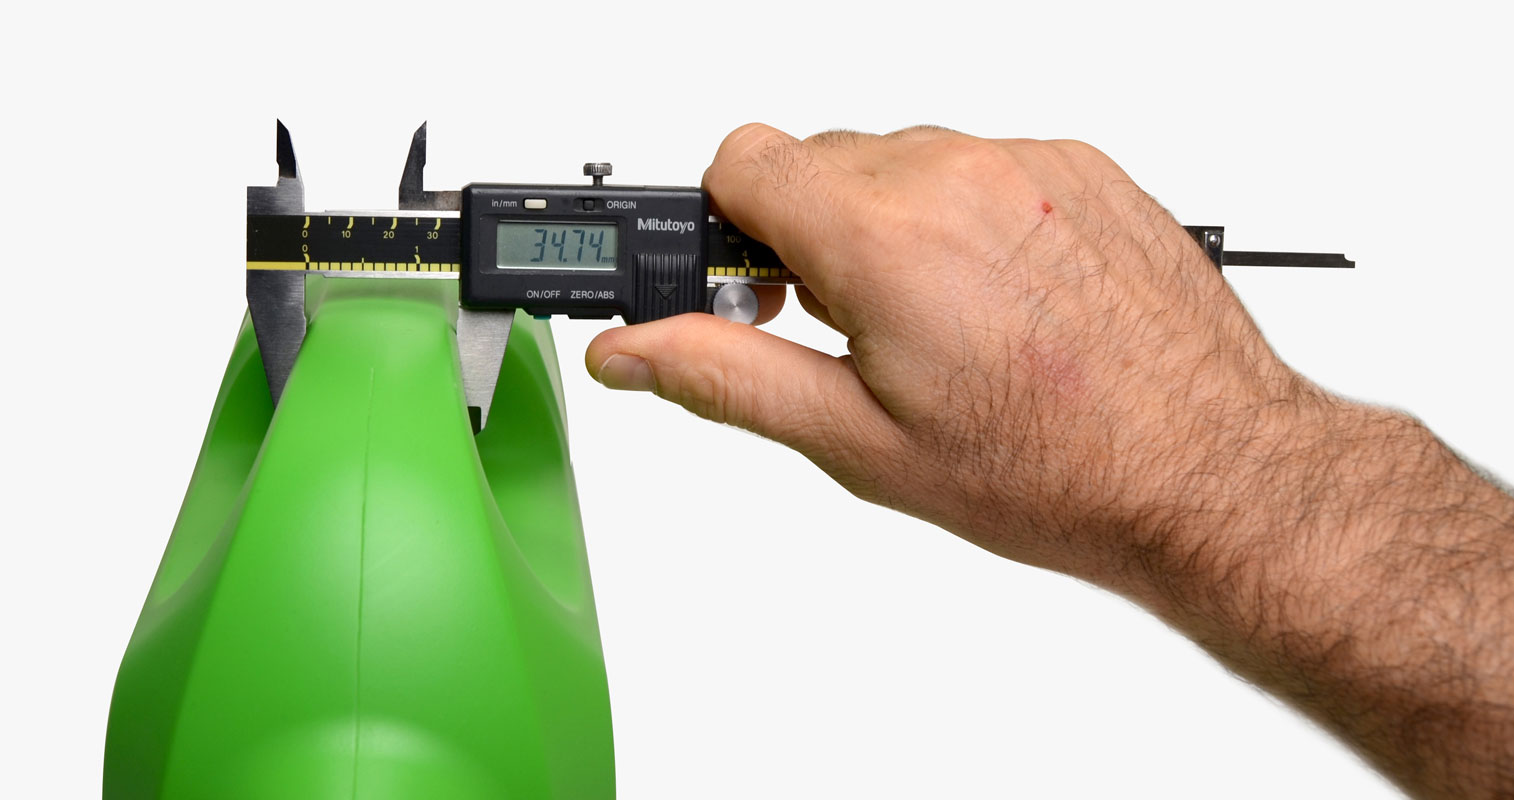 Hand measuring the depth of a green plastic bottle with measurement tool